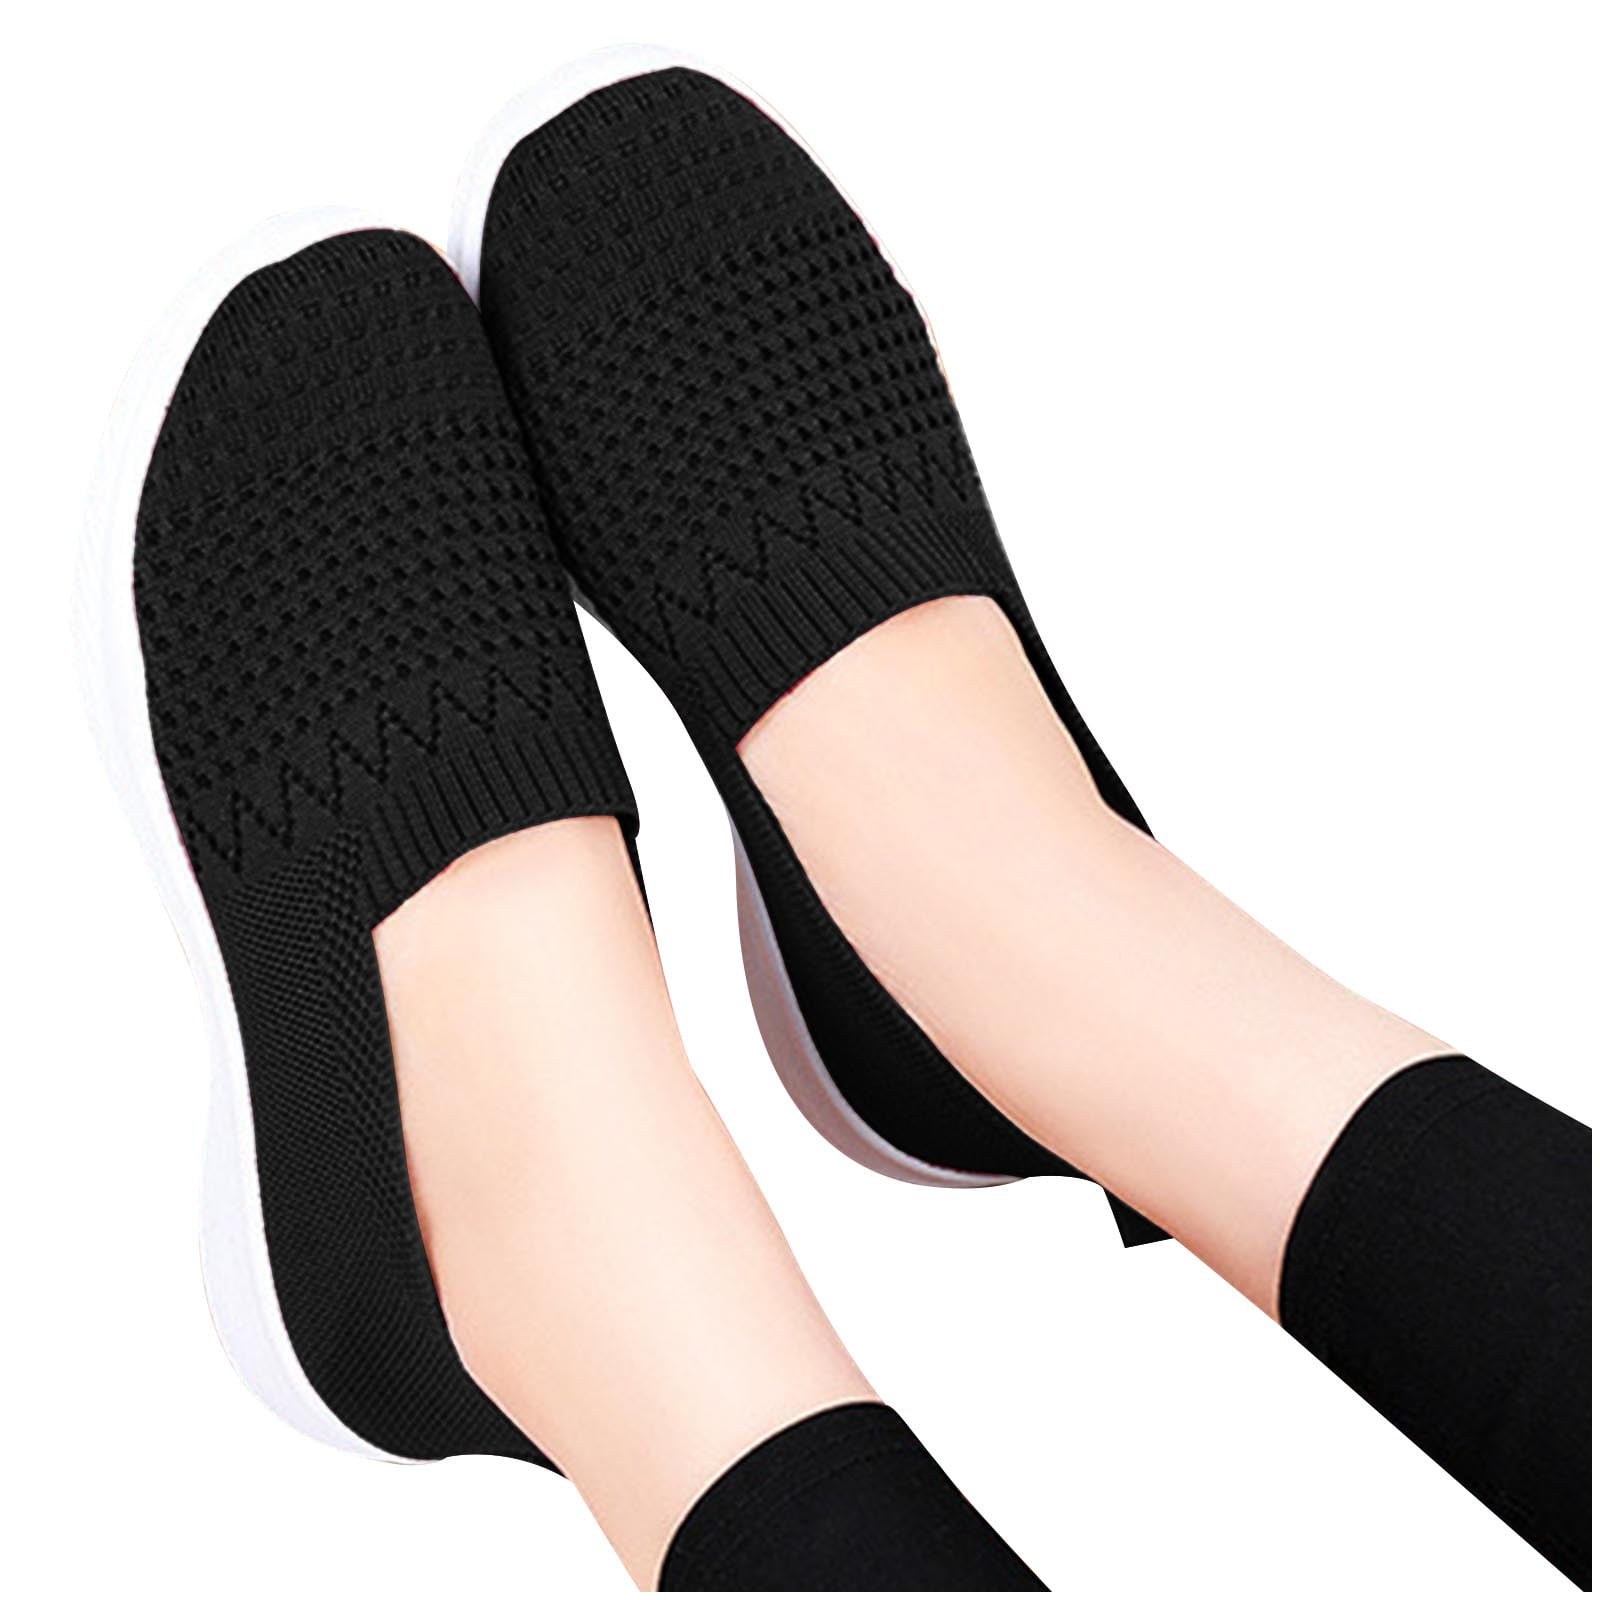 asdoklhq Womens Casual Shoes, Women Shoe Soft-soled Comfortable Flying  Woven Casual Ladies Shoes